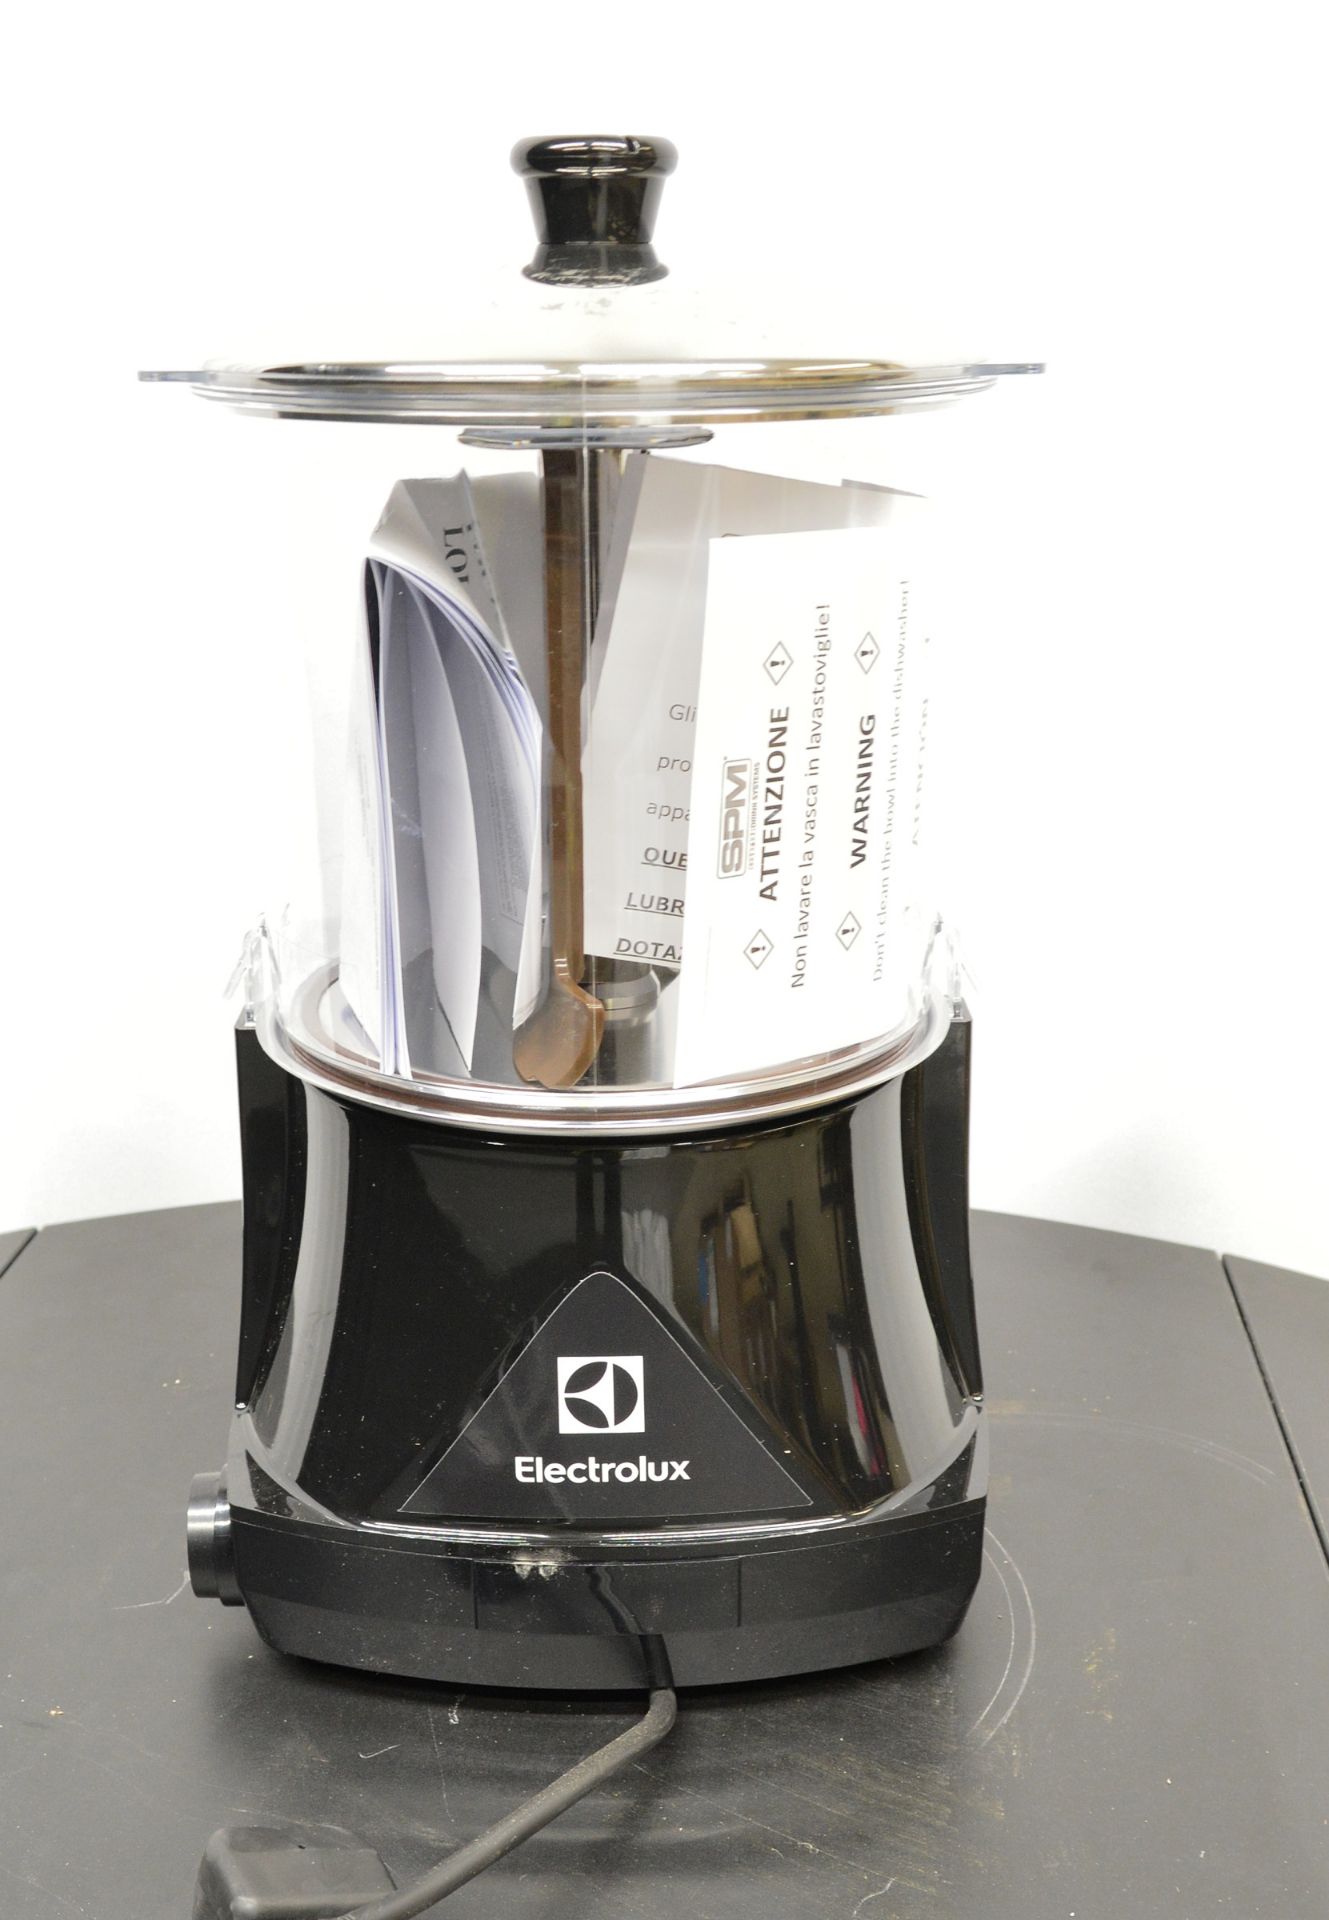 Electrolux LOLA6UK Electric Hot Chocolate Dispenser - 6L - BRAND NEW - Image 7 of 7